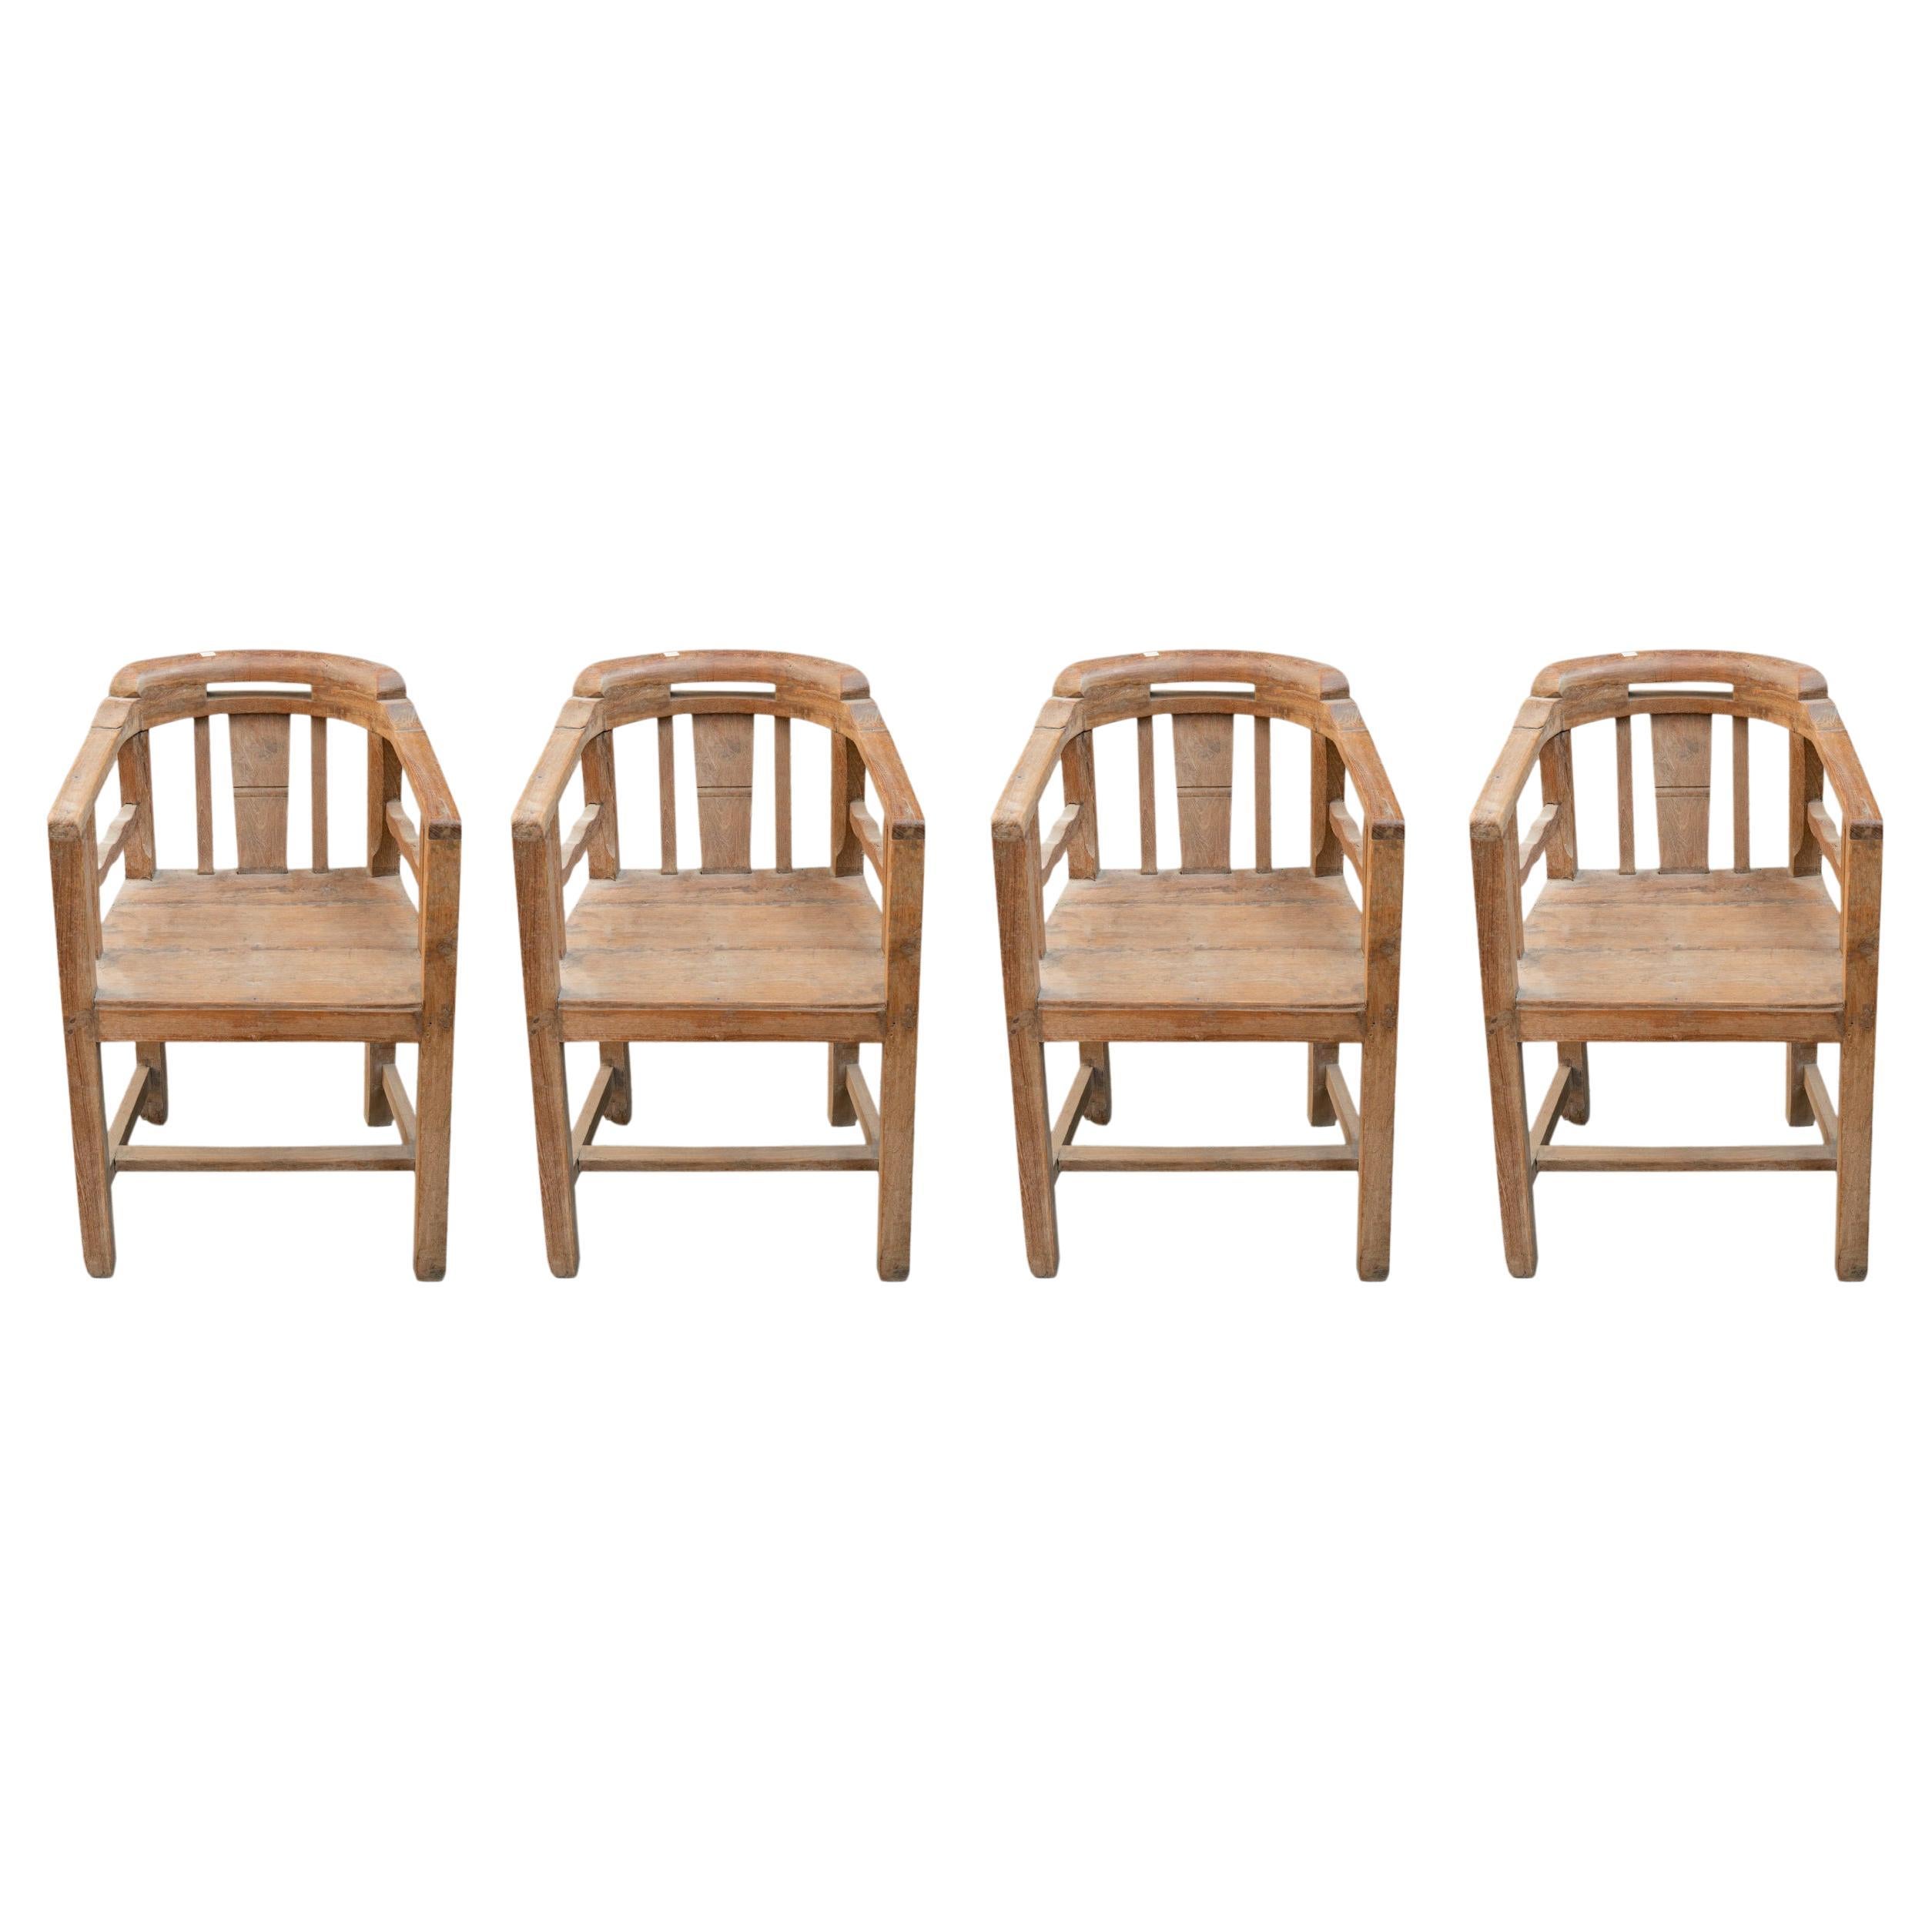 High Chairs in Teak from India  For Sale